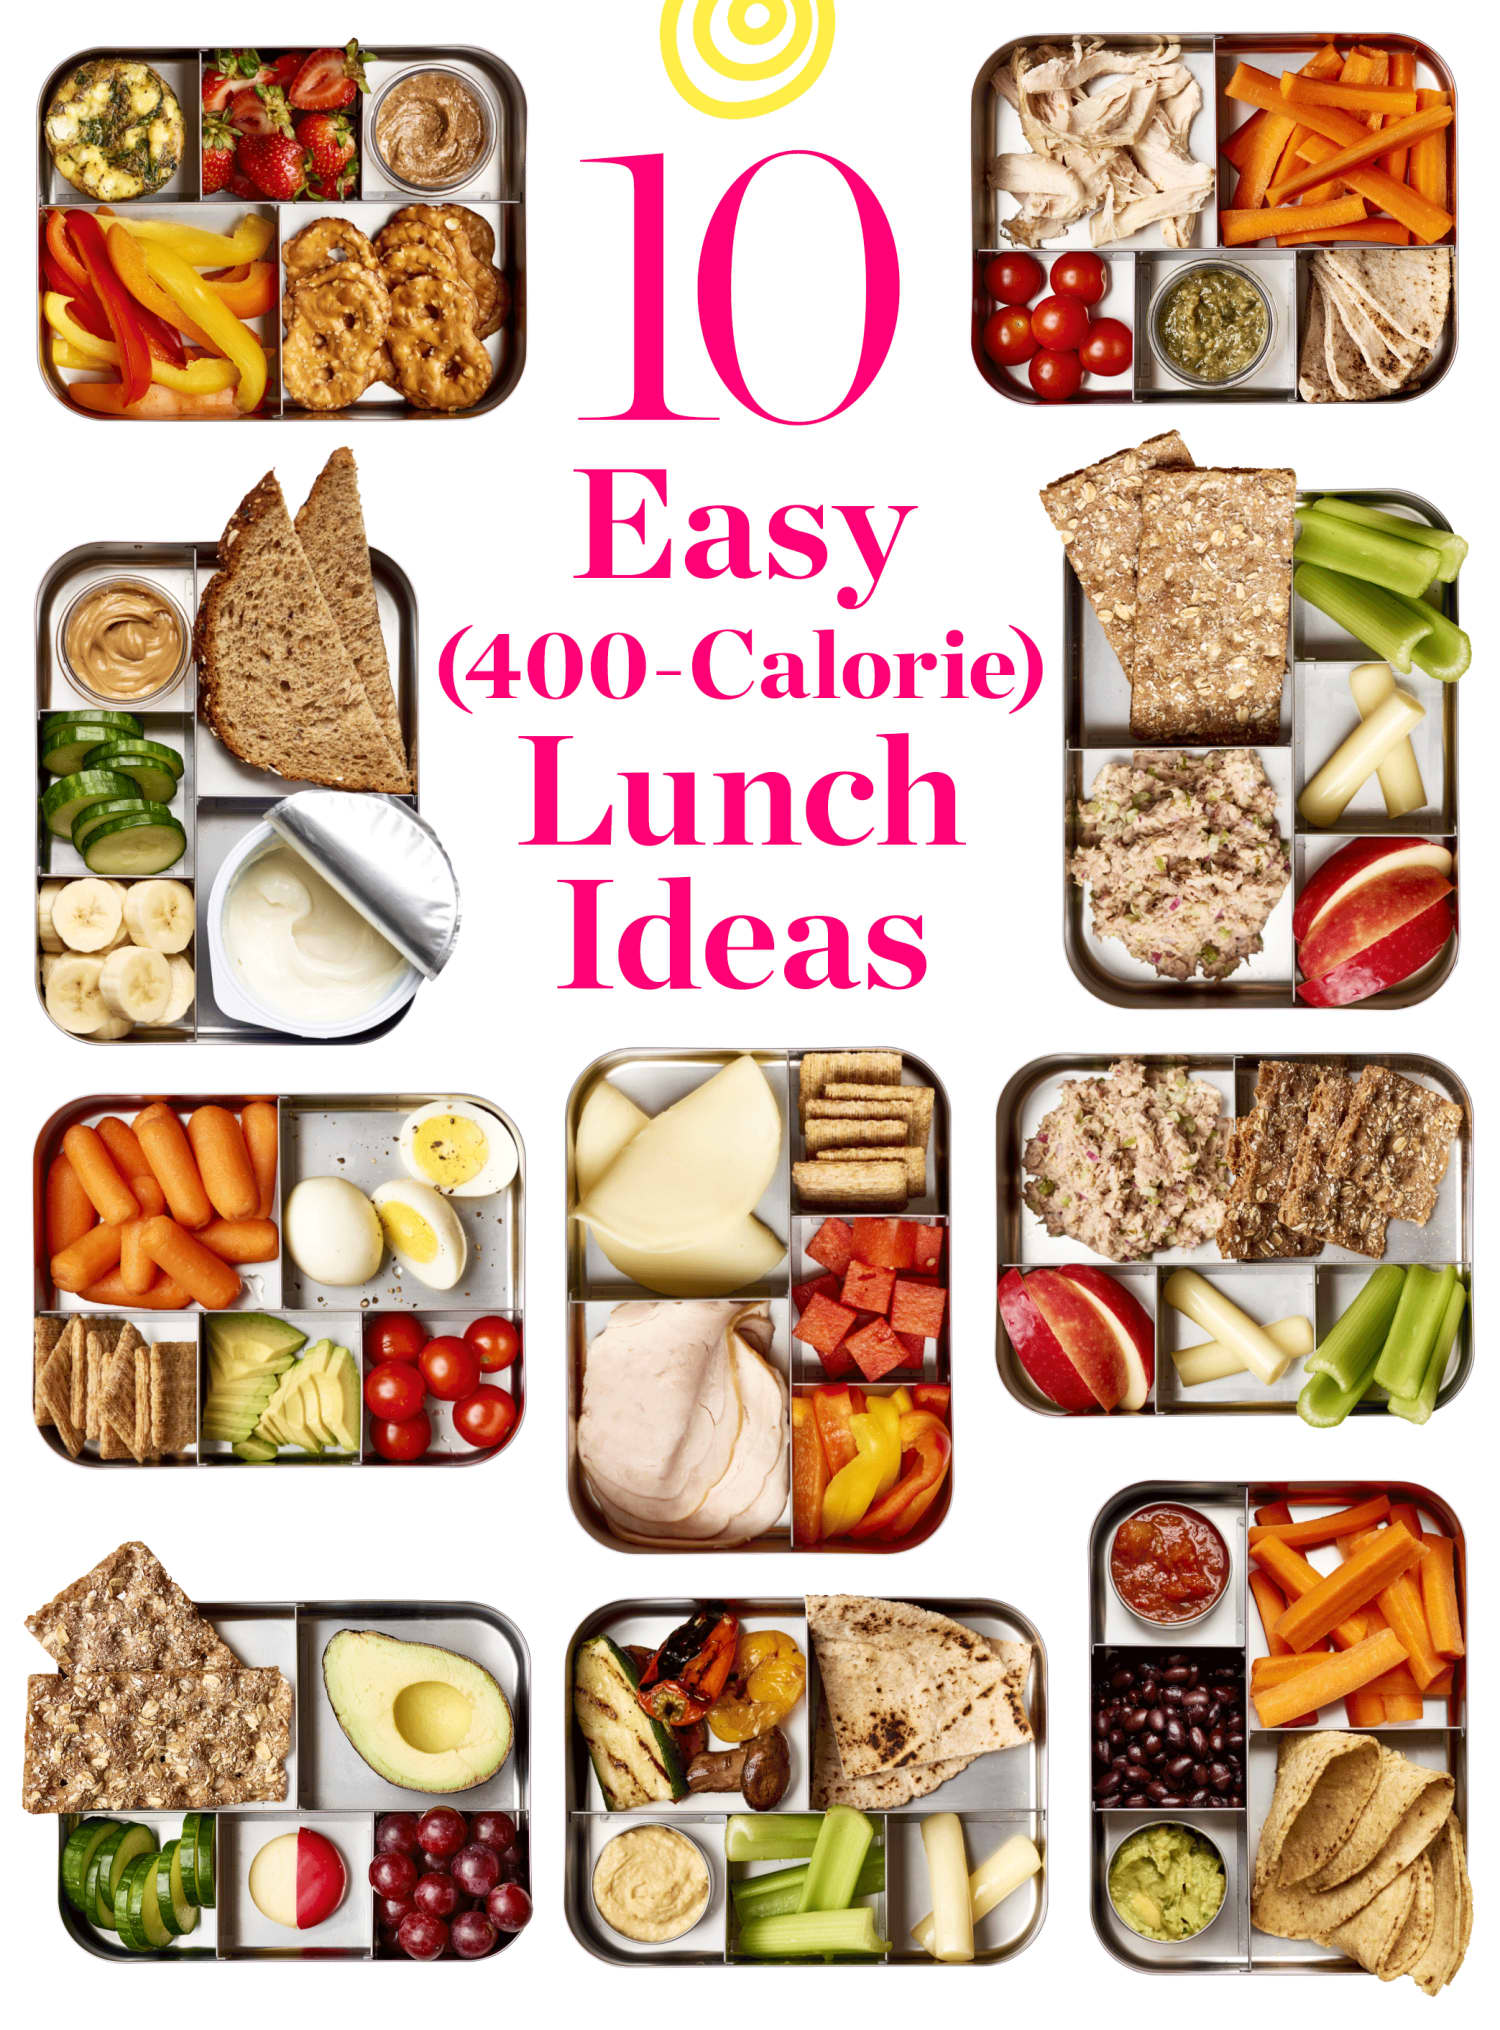 10 Quick and Easy Lunch Ideas Under 400 Calories | Kitchn